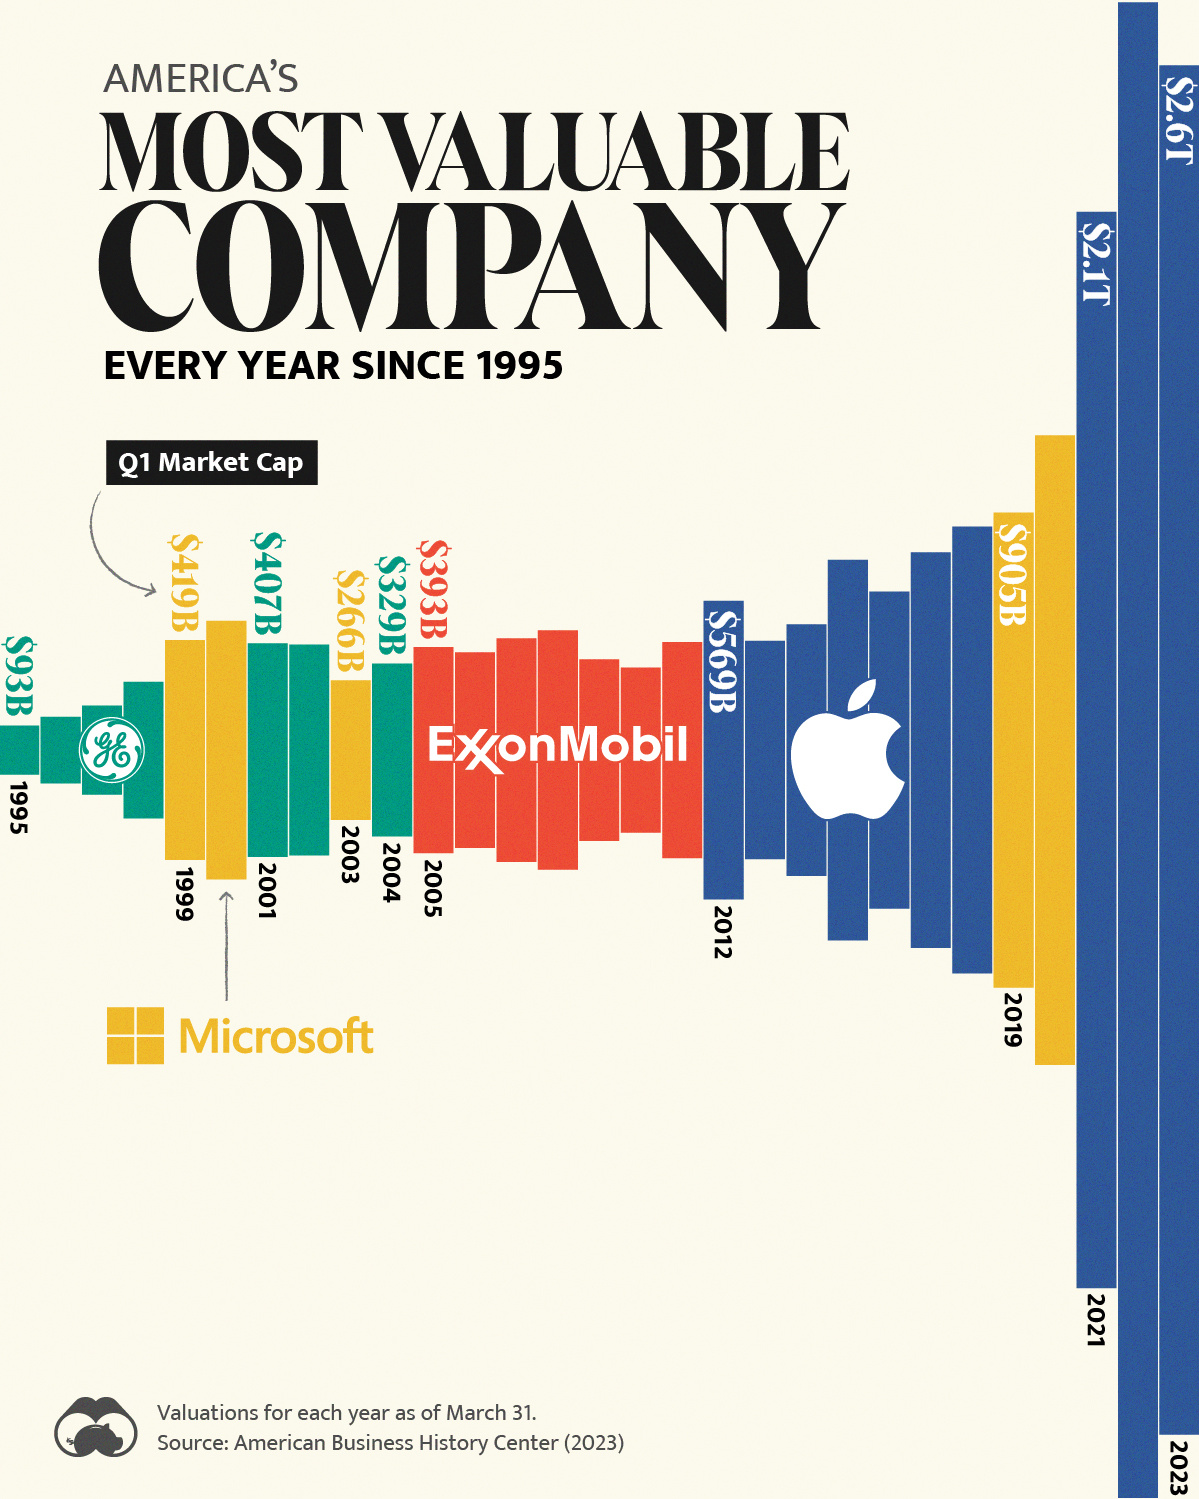 Largest Company in U.S. Every Year Since 1995